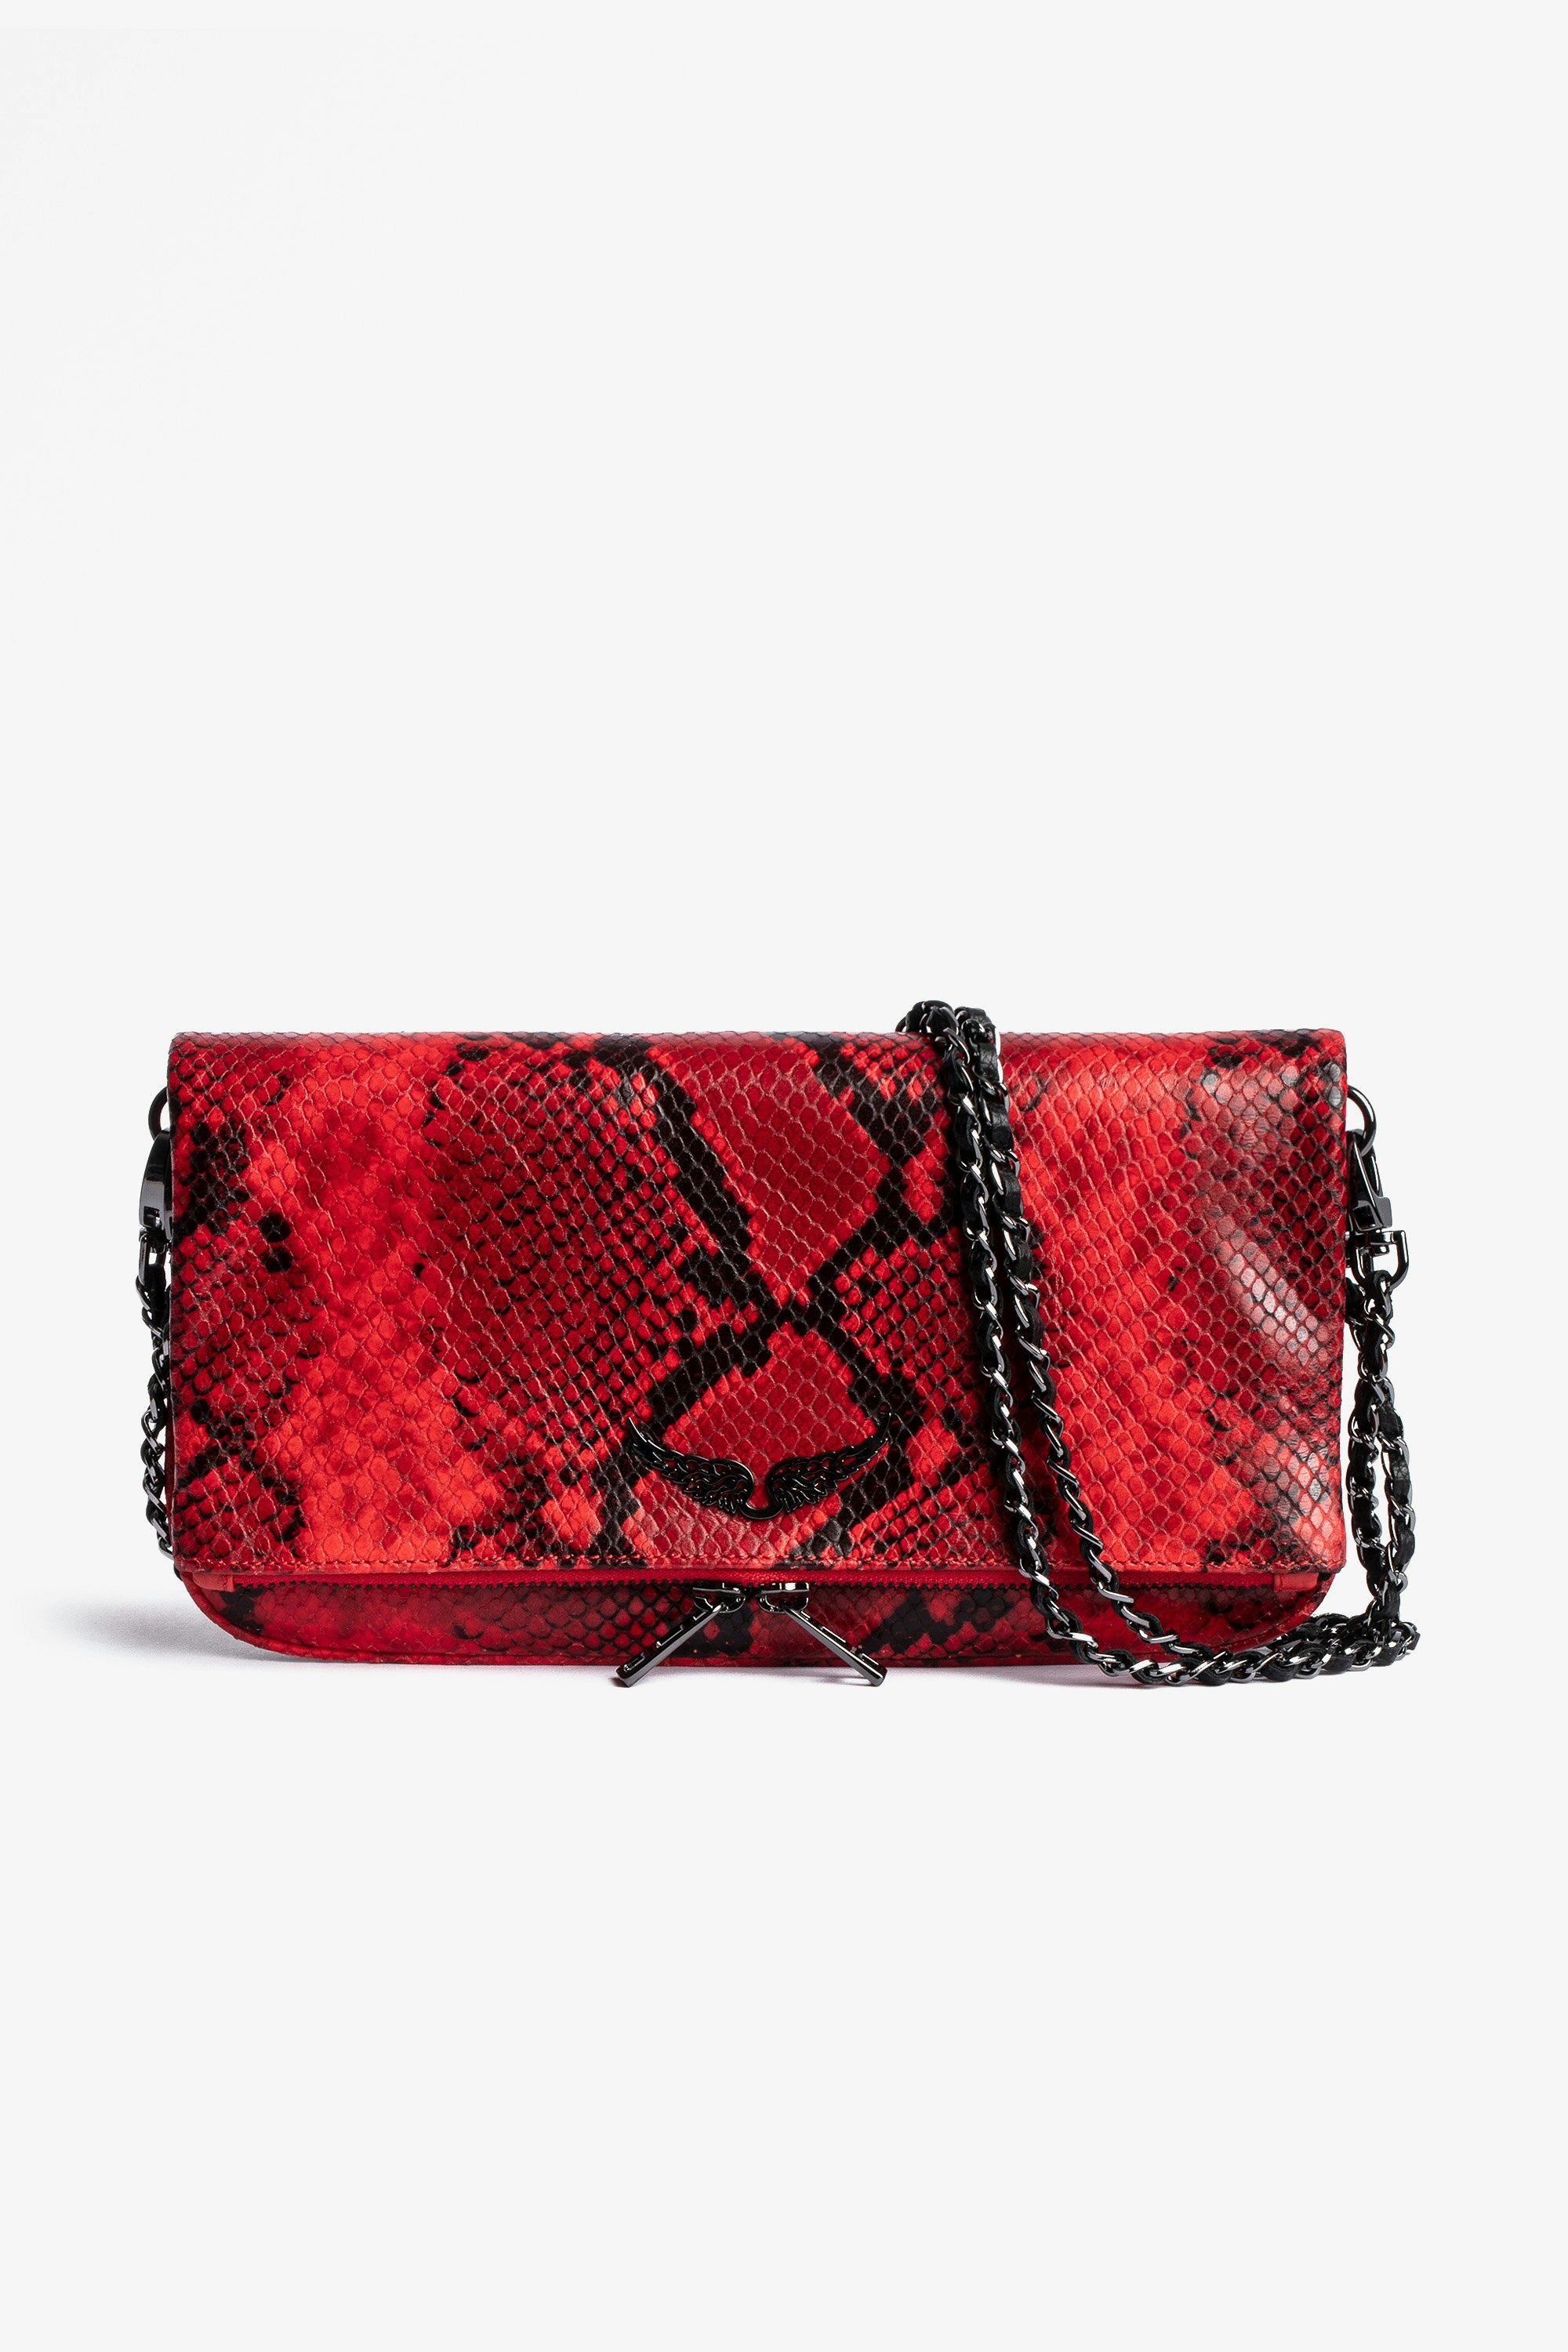 Rock Wild Clutch Women's red leather clutch bag with snakeskin effect